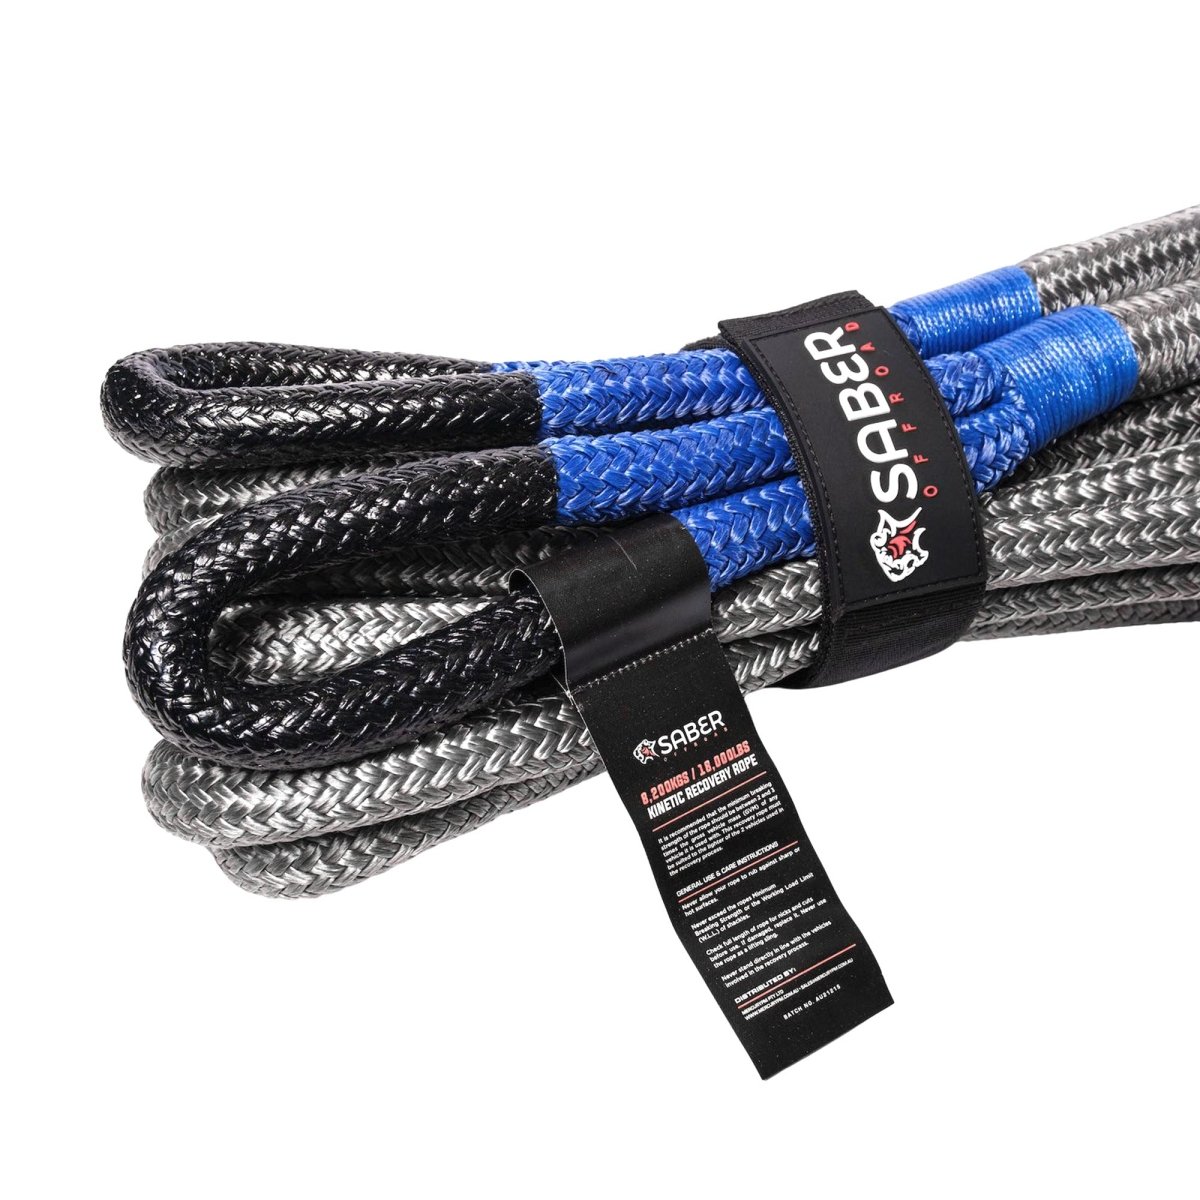 Saber Kinetic Recovery Rope - 8,000KG | Saber Offroad | A247 Gear